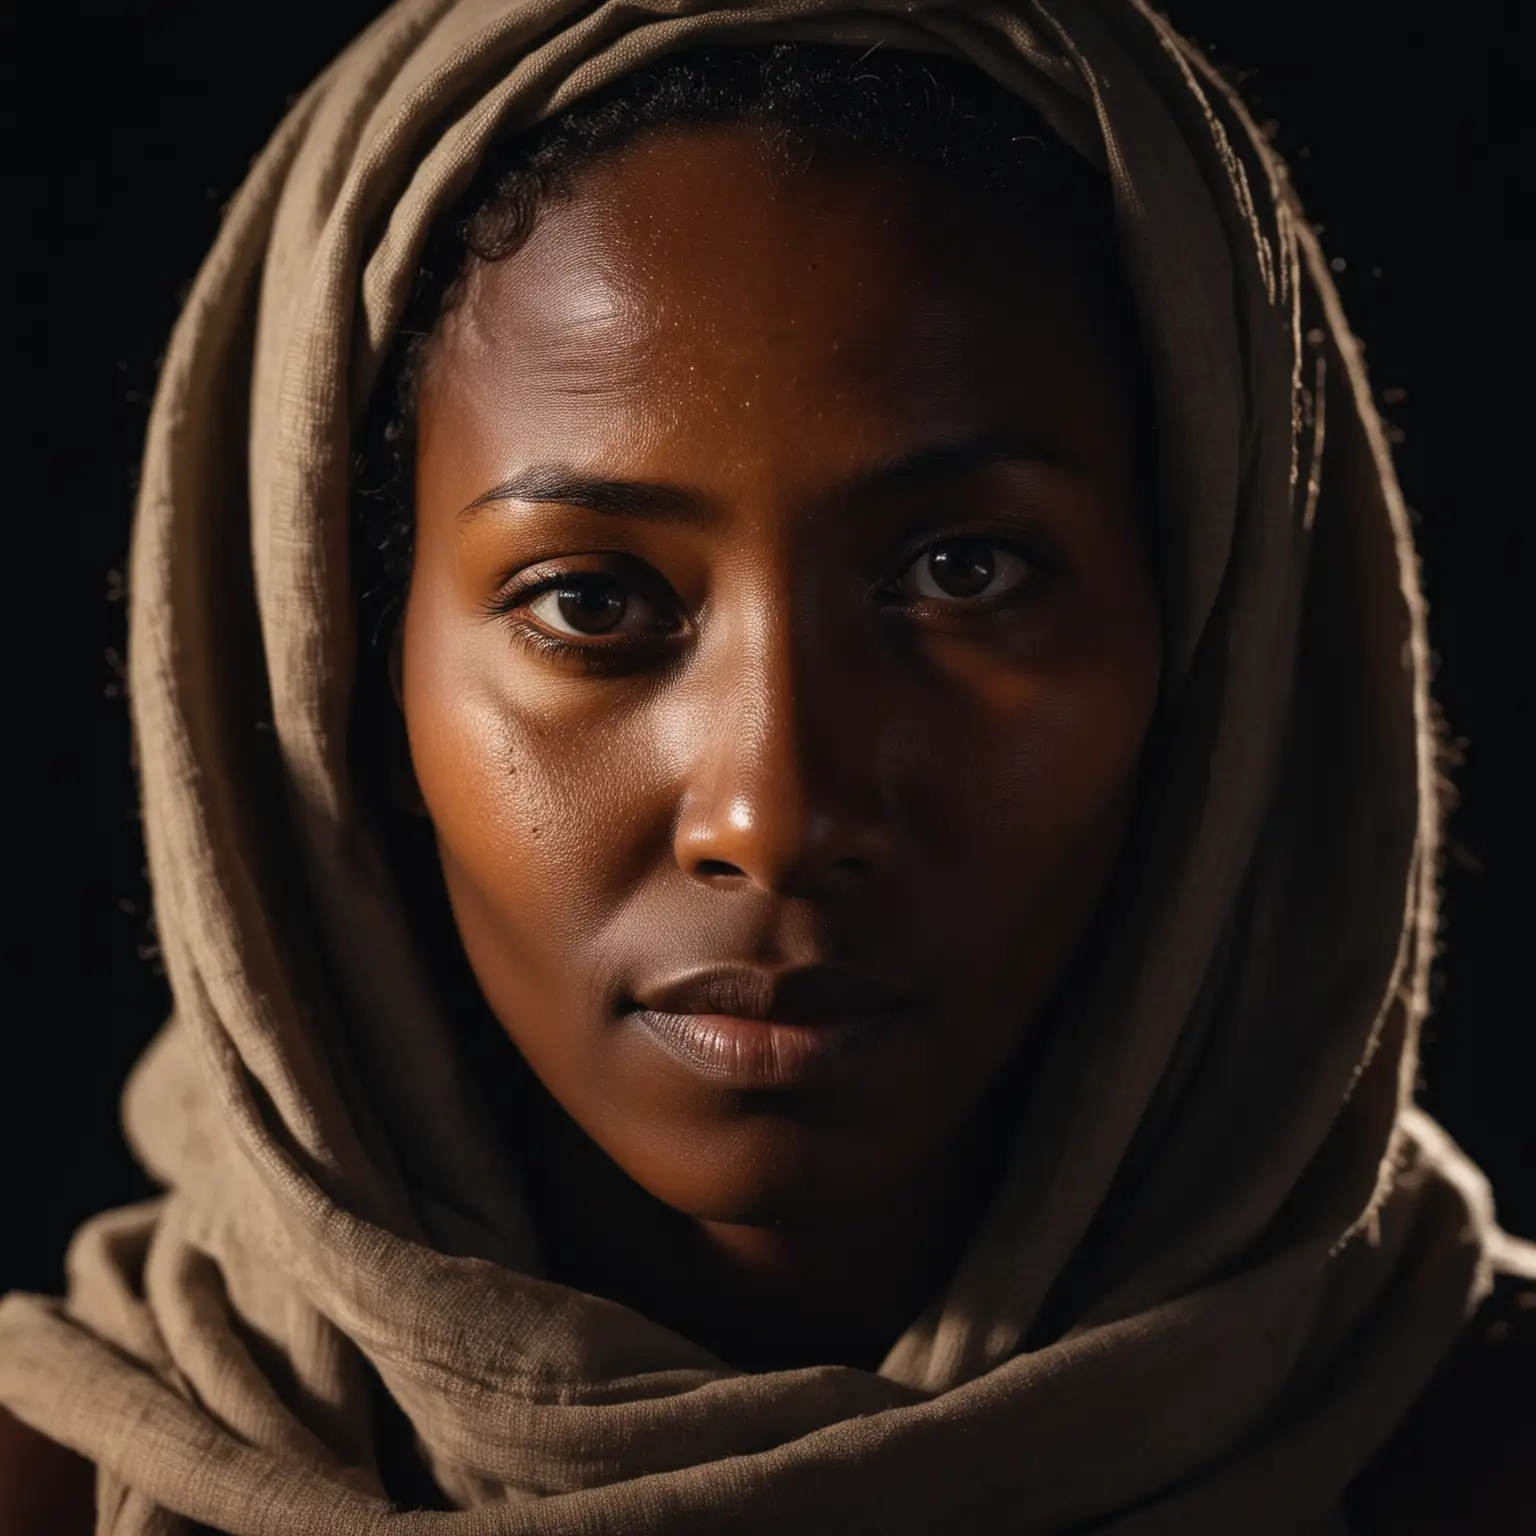 Full Face of the 50 year old pitch black ethiopian woman looking straight into the camera

